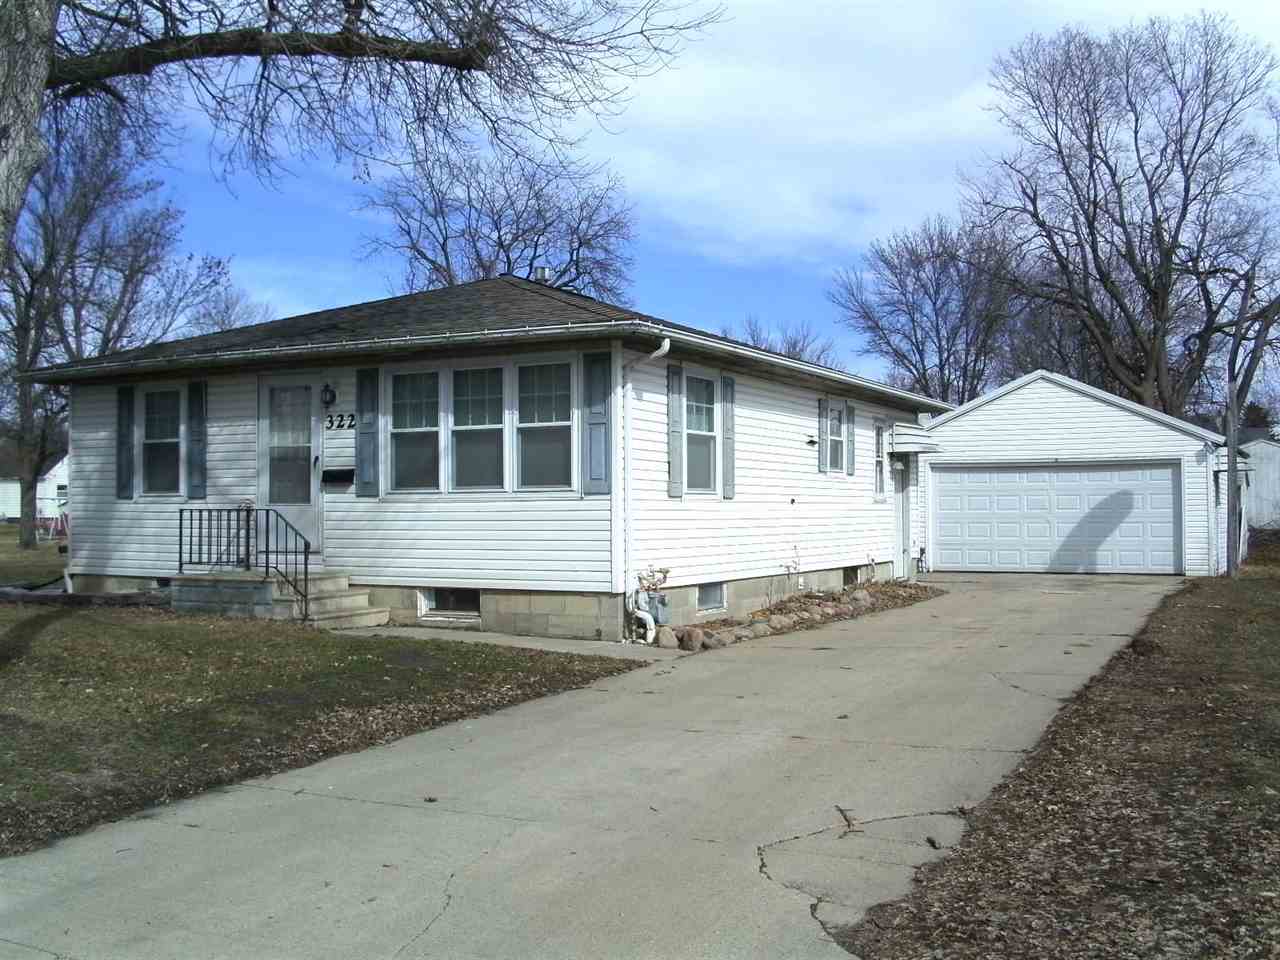 322 16th Place, Estherville, IA 51334 